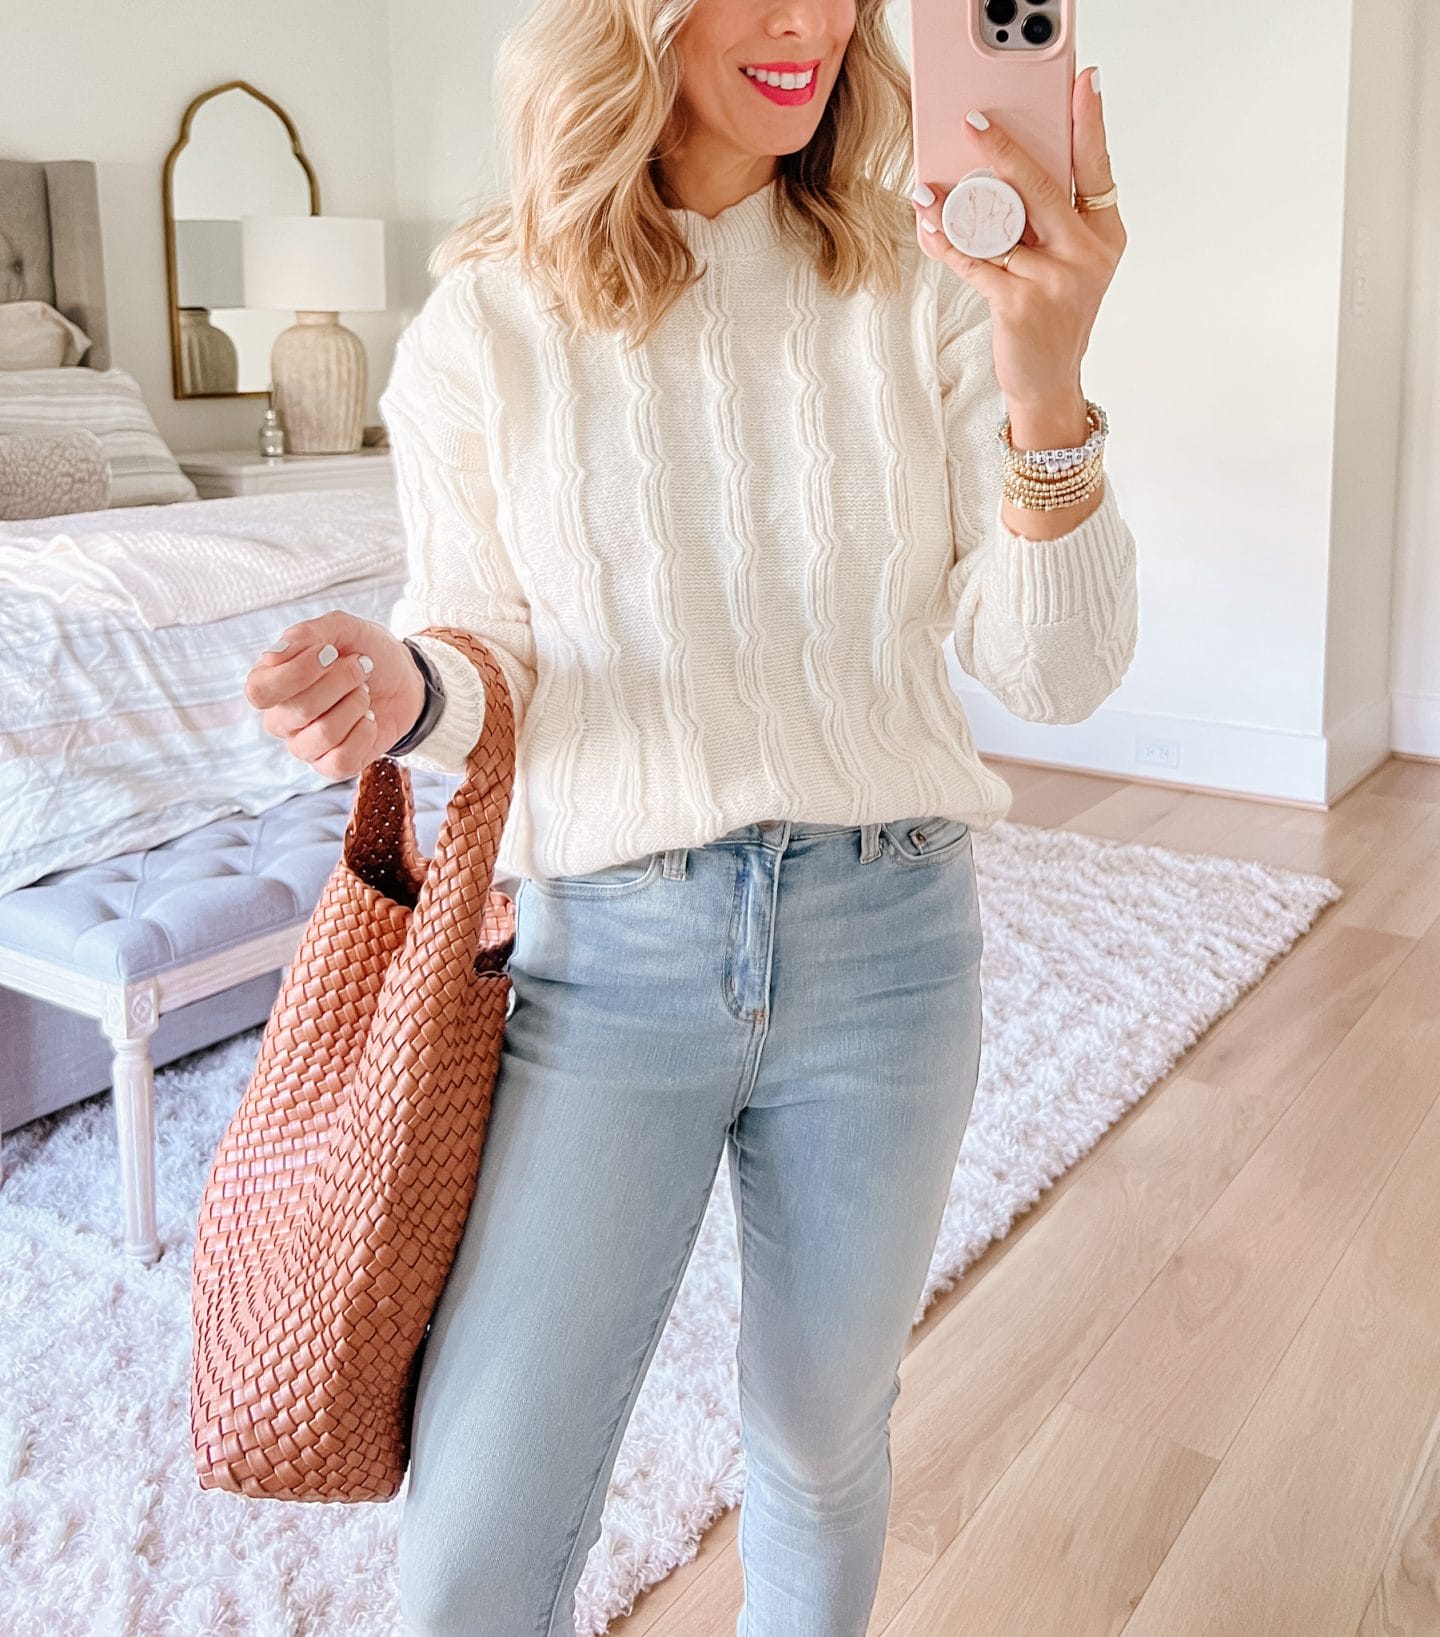 Cable knit Sweater, jeans, Booties, Bag 